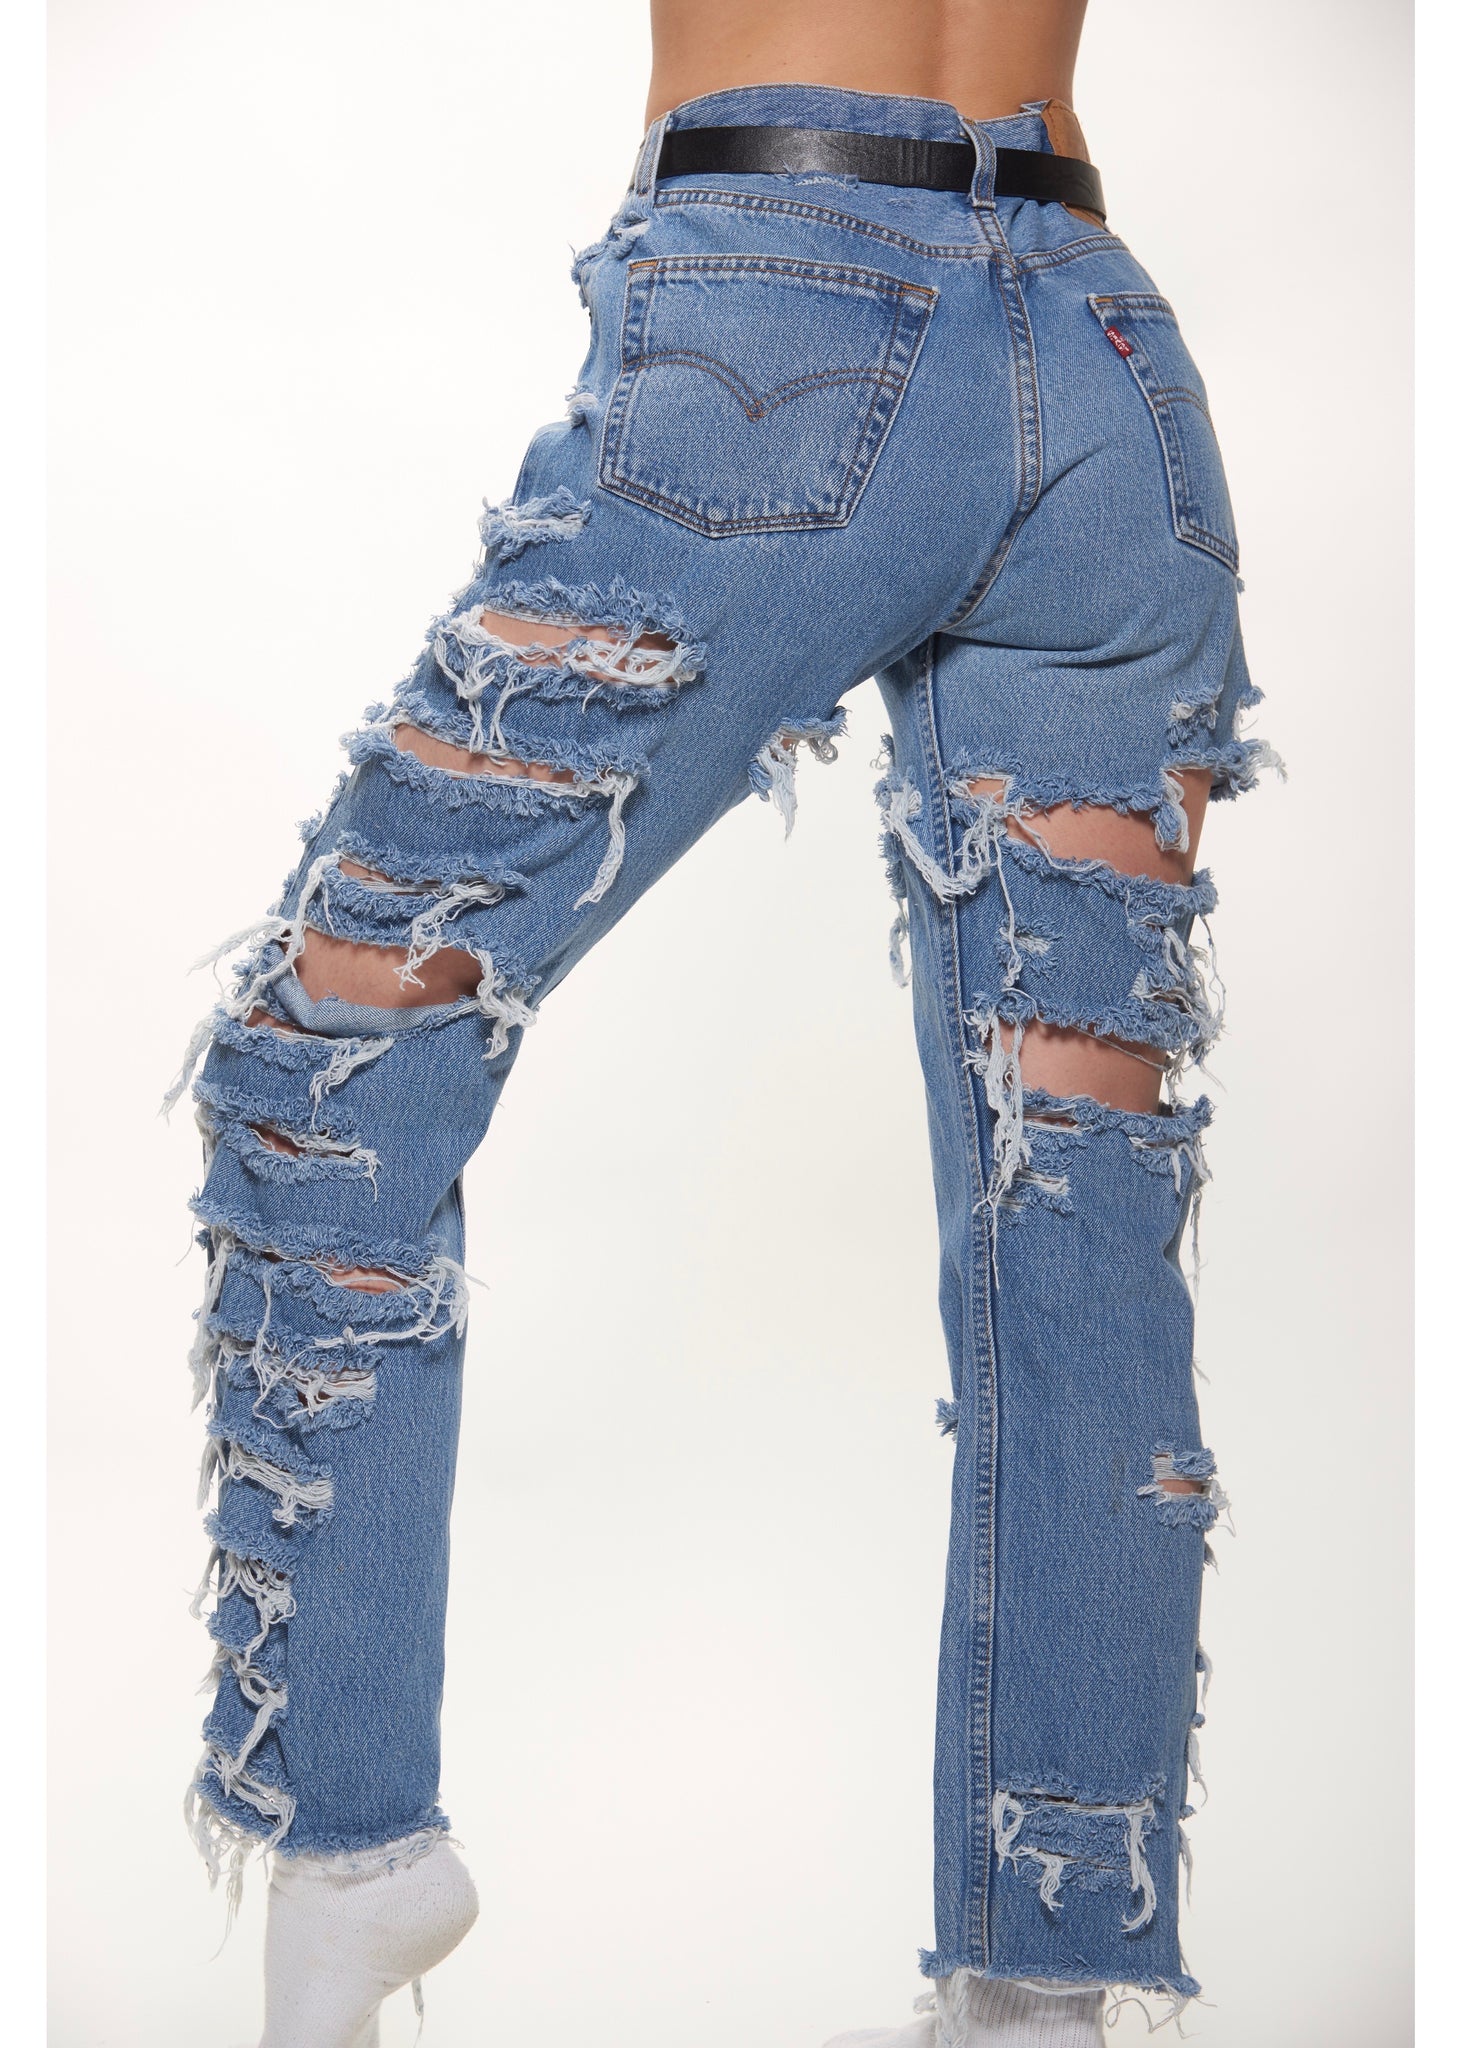 shred jeans